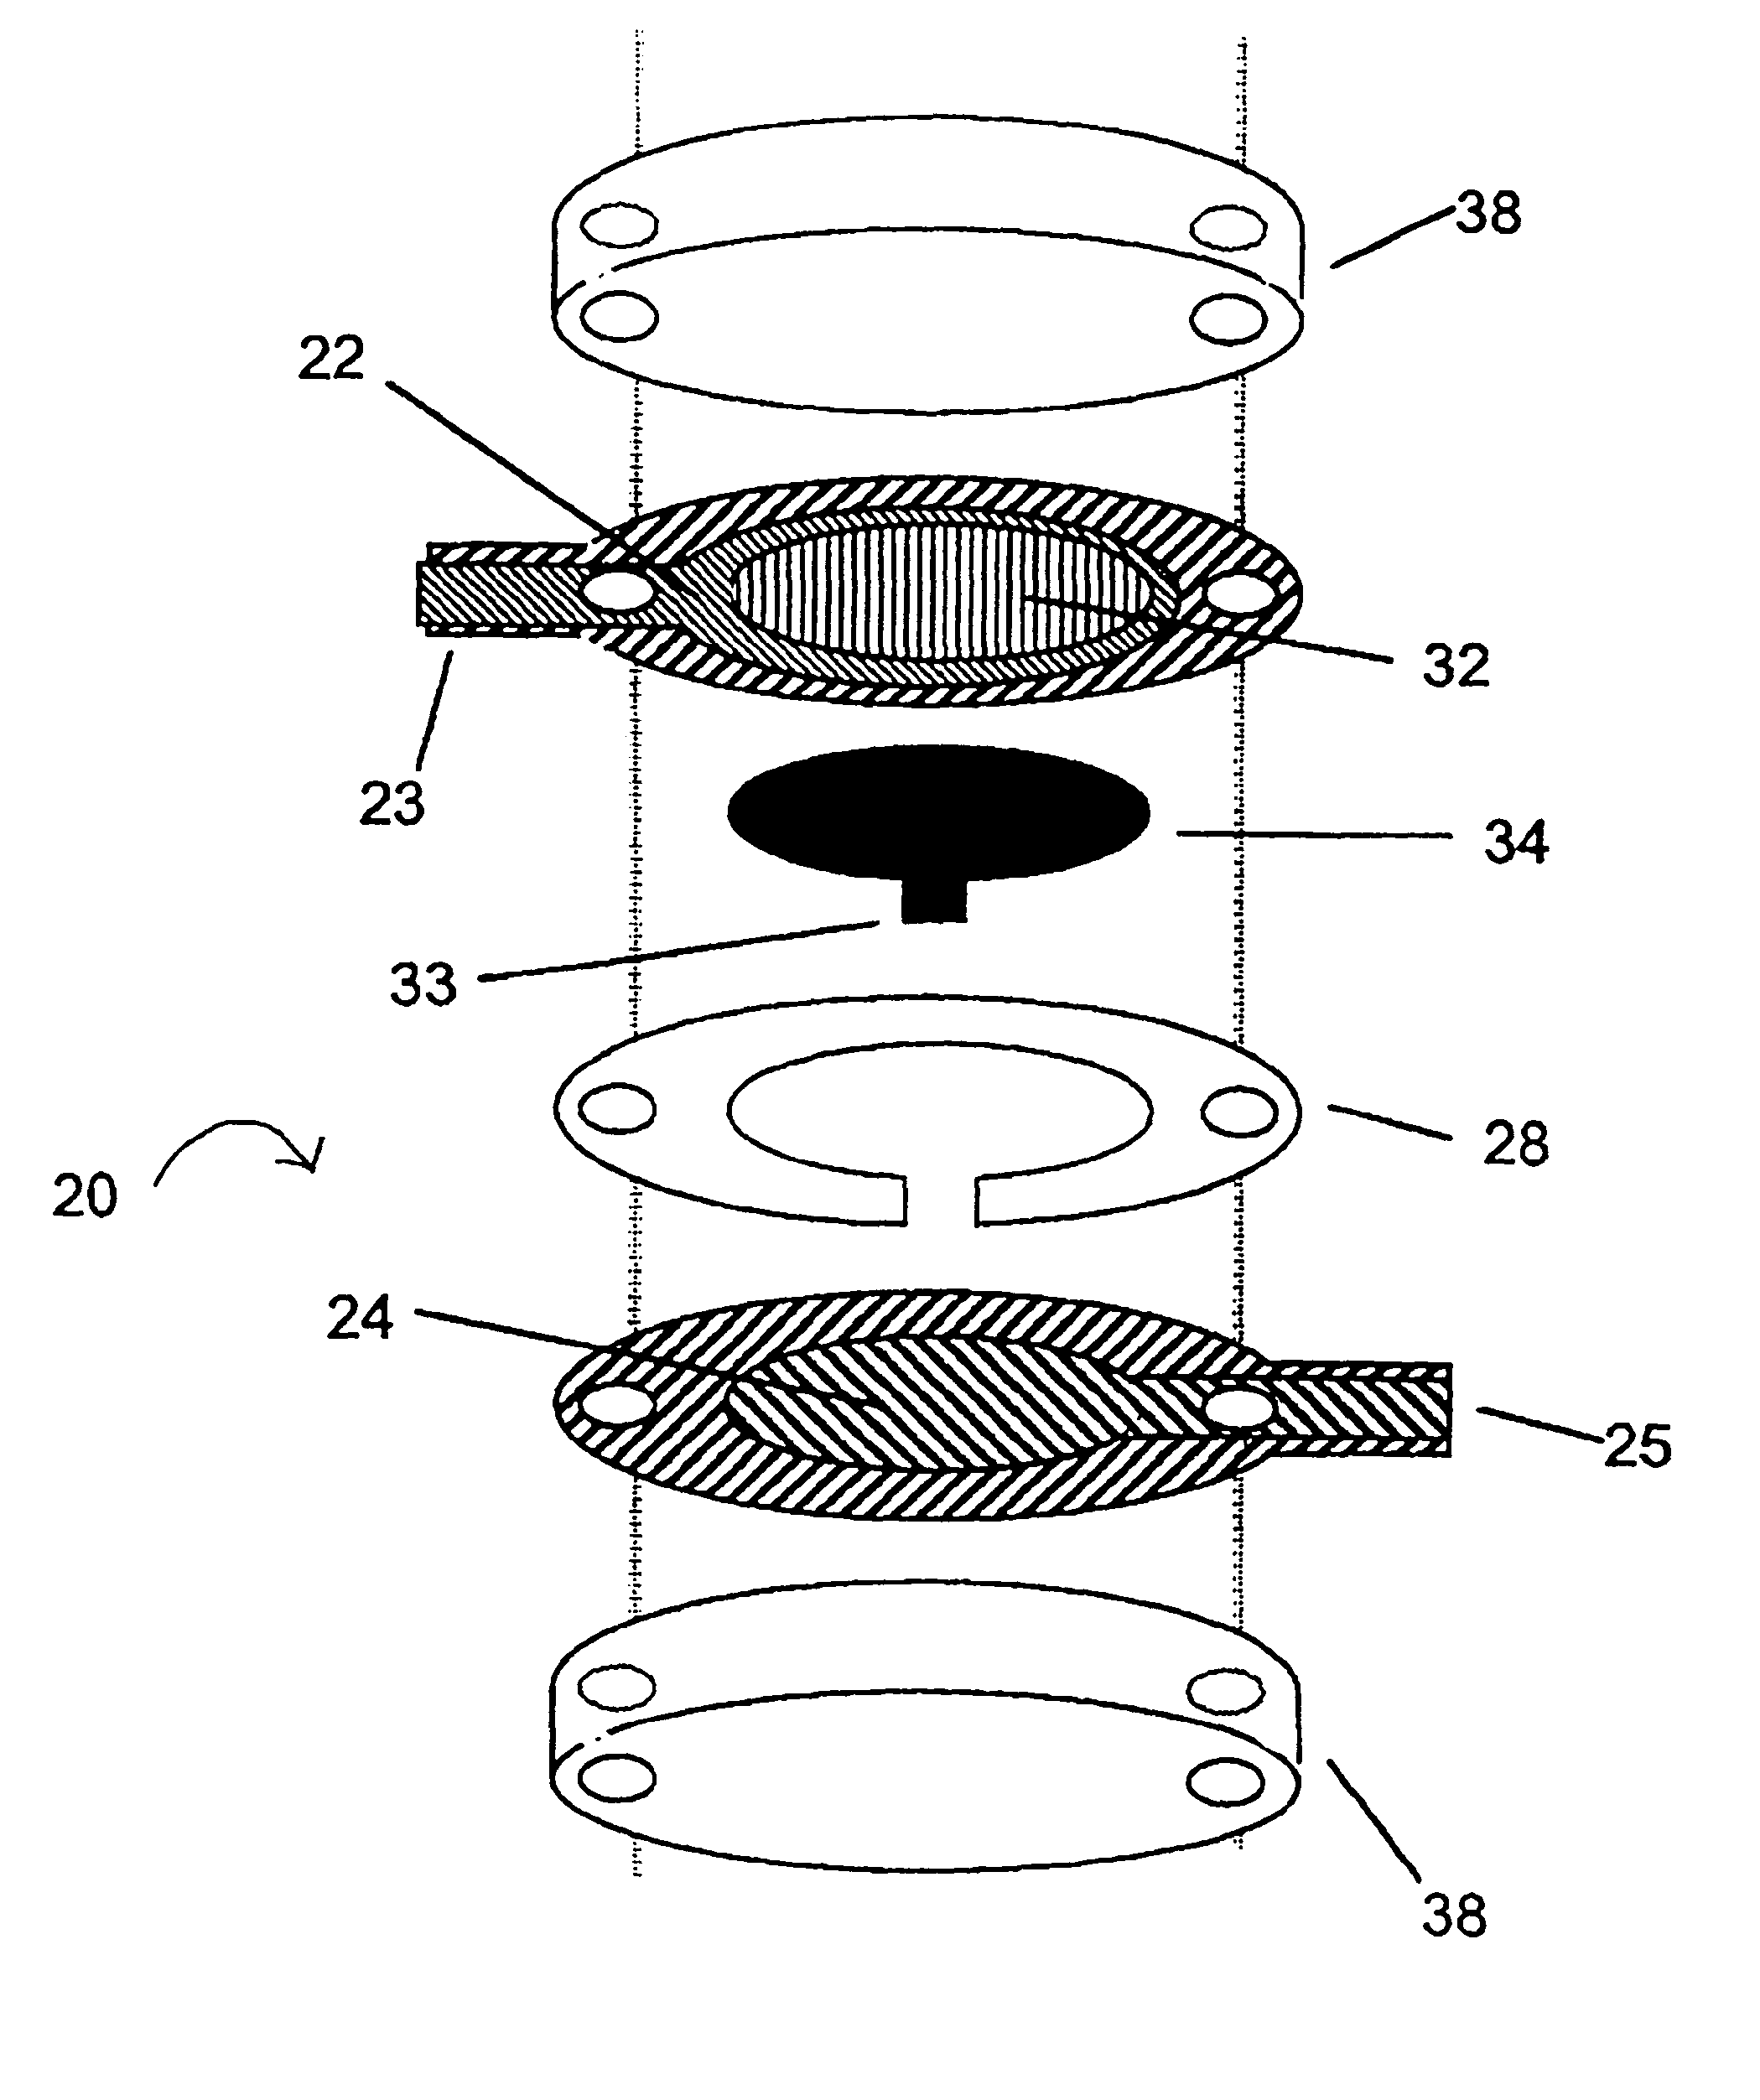 Integrated Lancing and Measurement Device